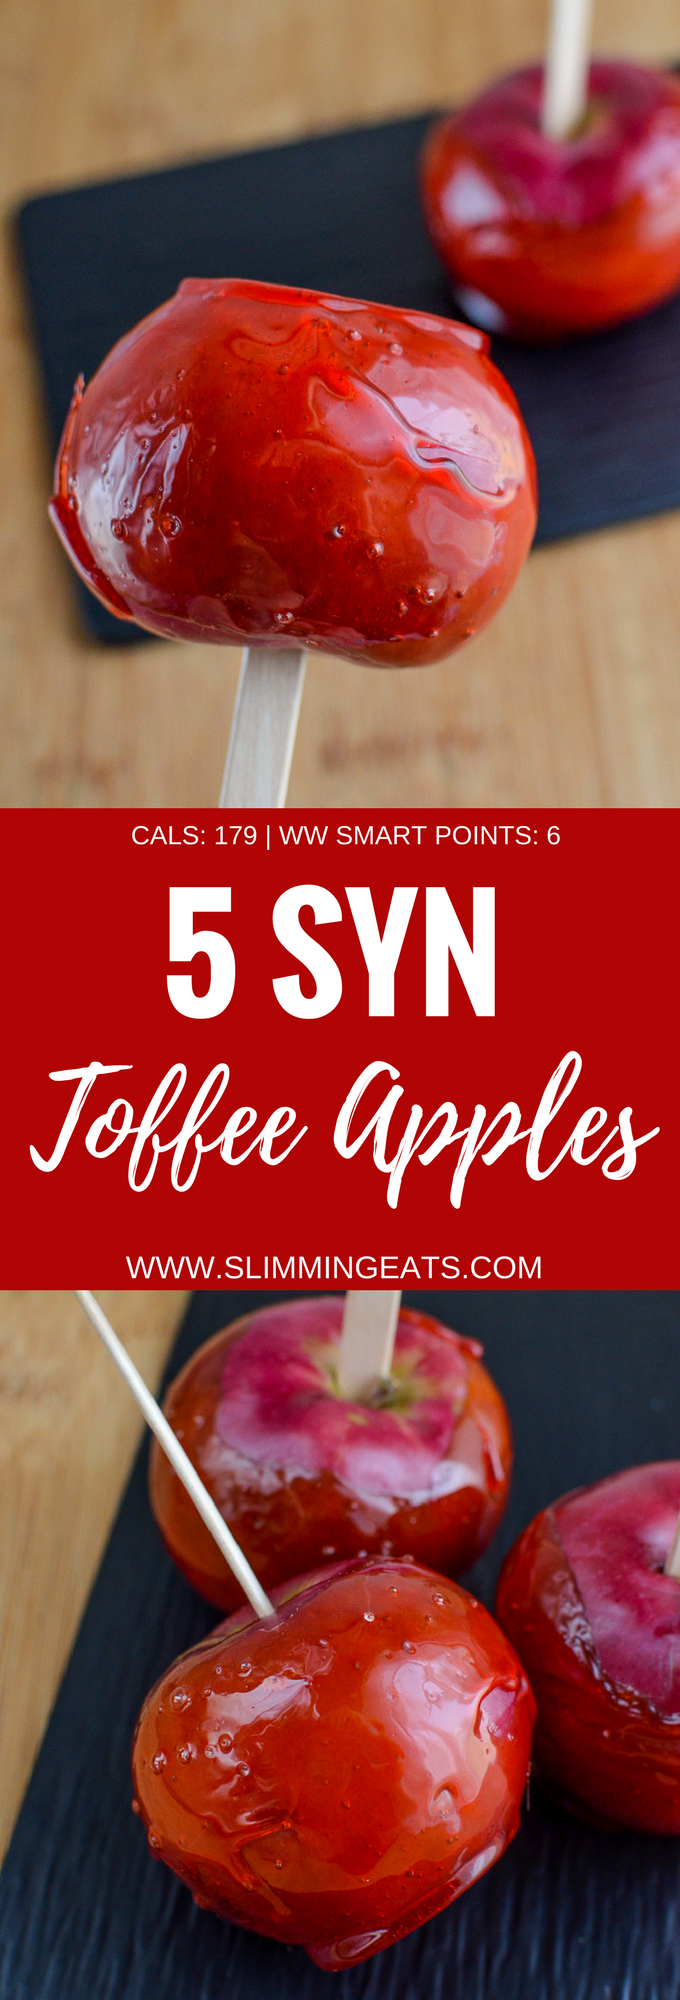 Slimming Eats Low Syn Toffee Apples / Candy Apples - gluten free, dairy free, vegetarian, Slimming World and Weight Watchers friendly